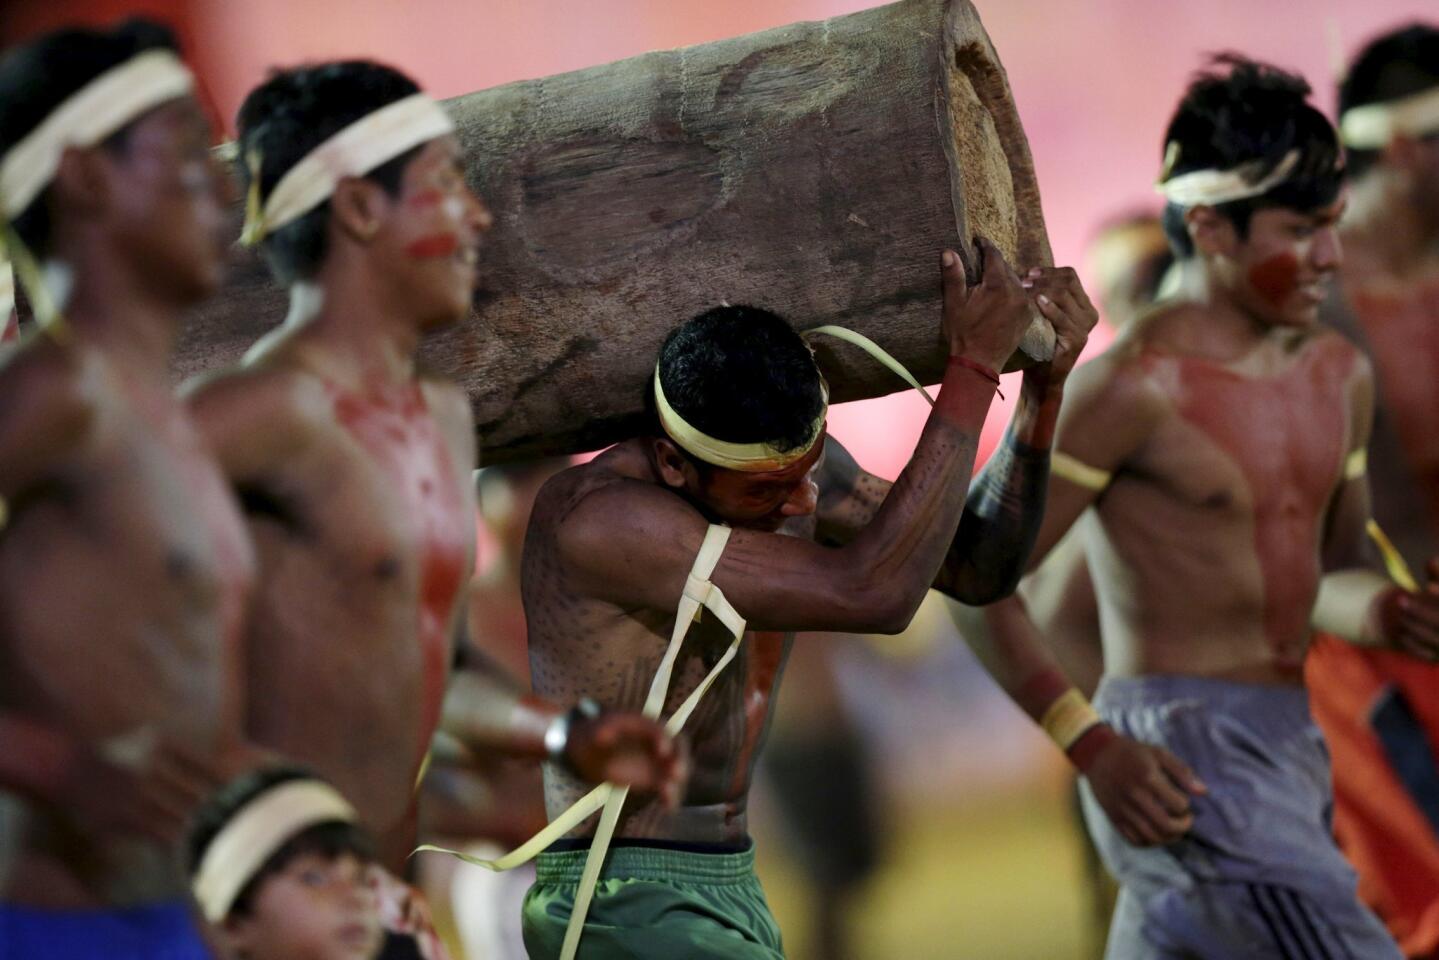 An indigenous man from the Xerente tribe competes in a relay race carrying a tree trunk during the first World Games for Indigenous Peoples in Palmas